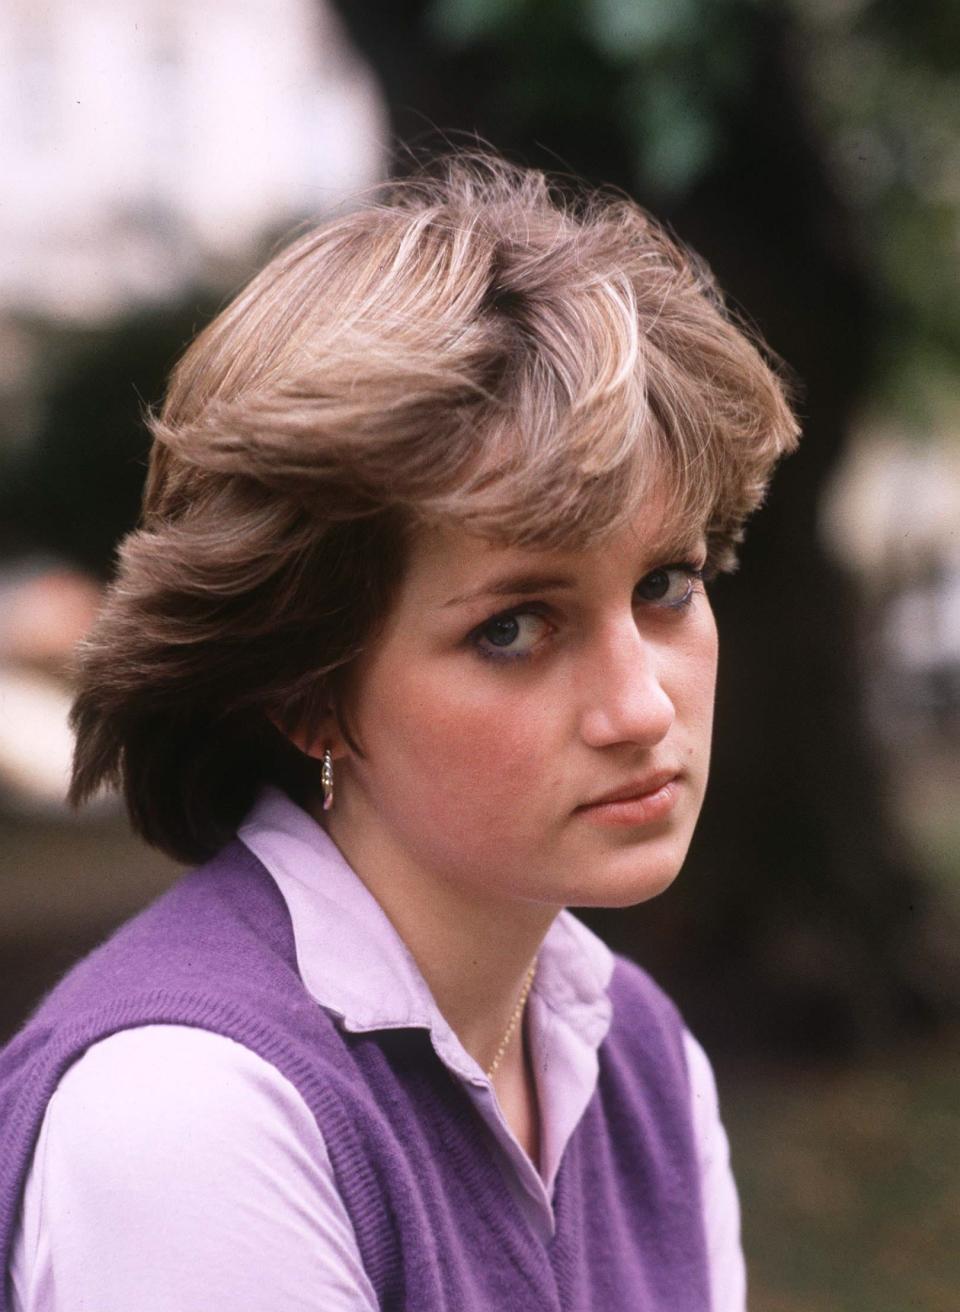 Princess Diana at the age of 19 while she working as a kindergarden nursery school teacher in 1980.